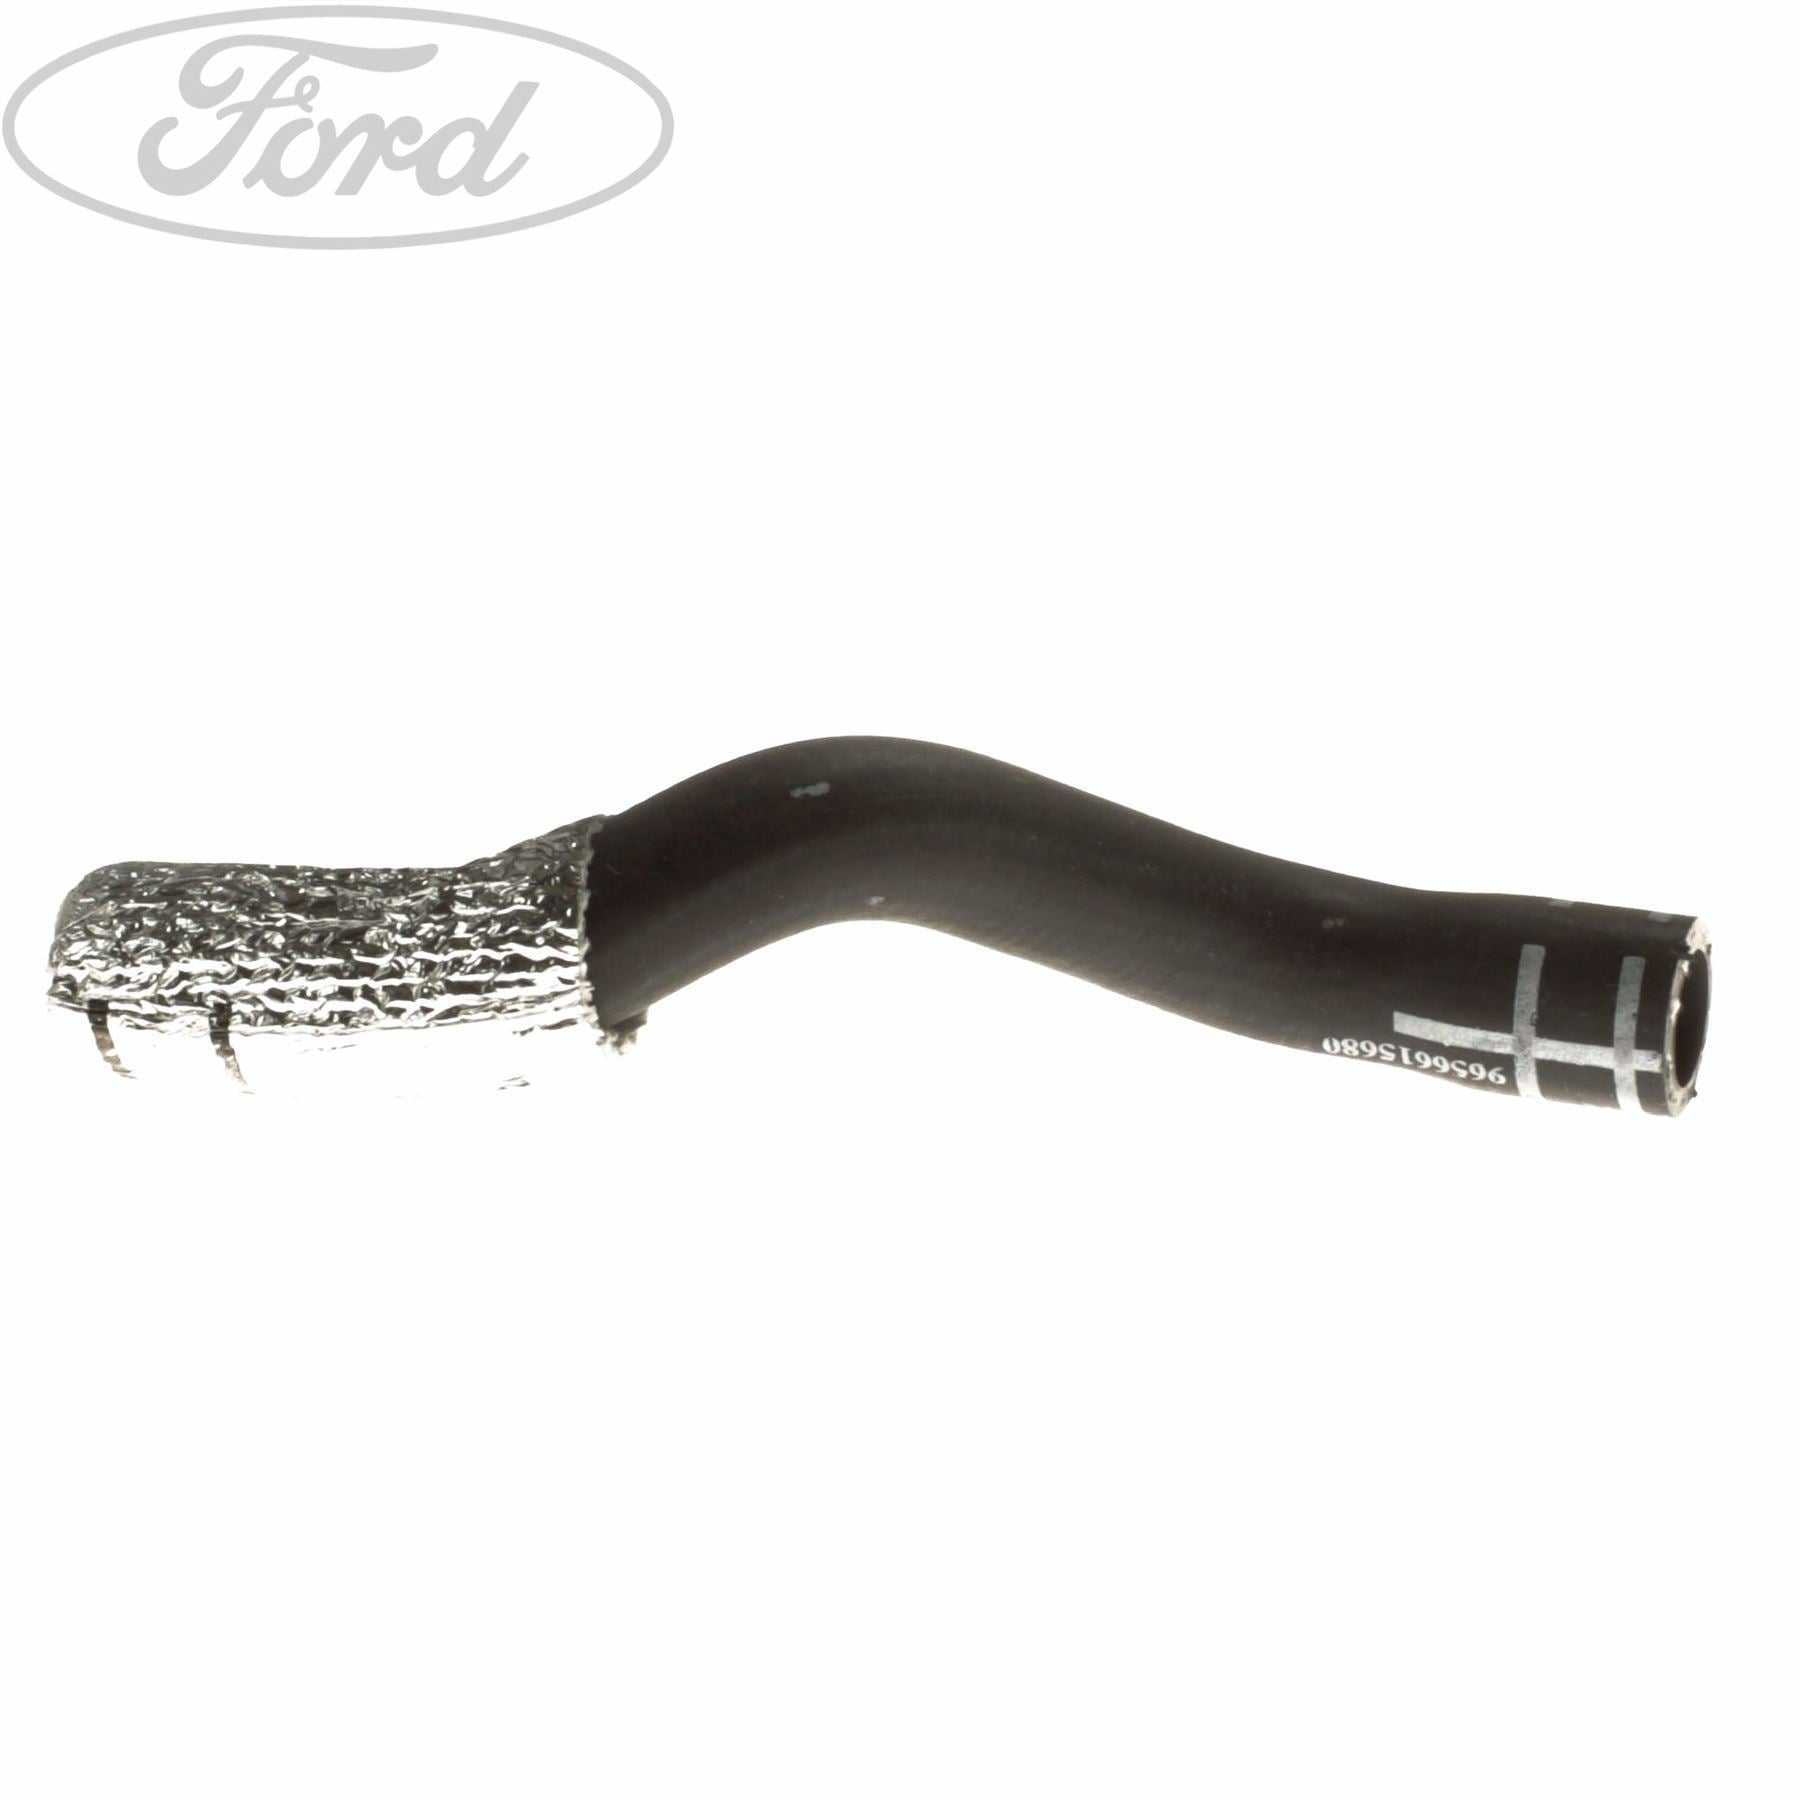 Ford, TURBOCHARGER CONNECTING HOSE